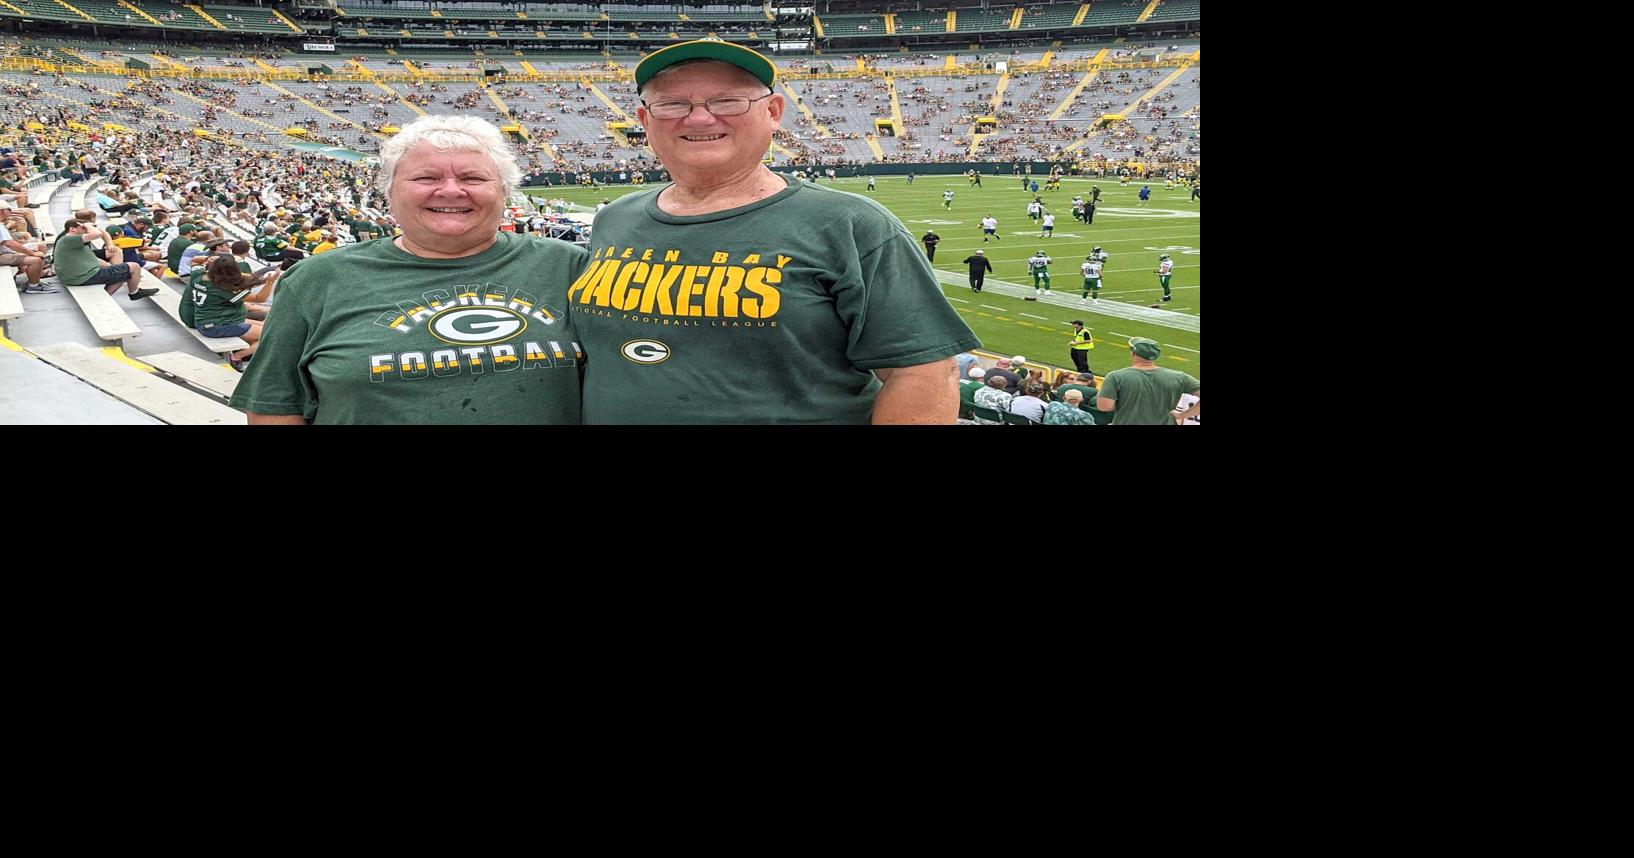 Schocking' story of 45 year wait for Packers season tickets, News